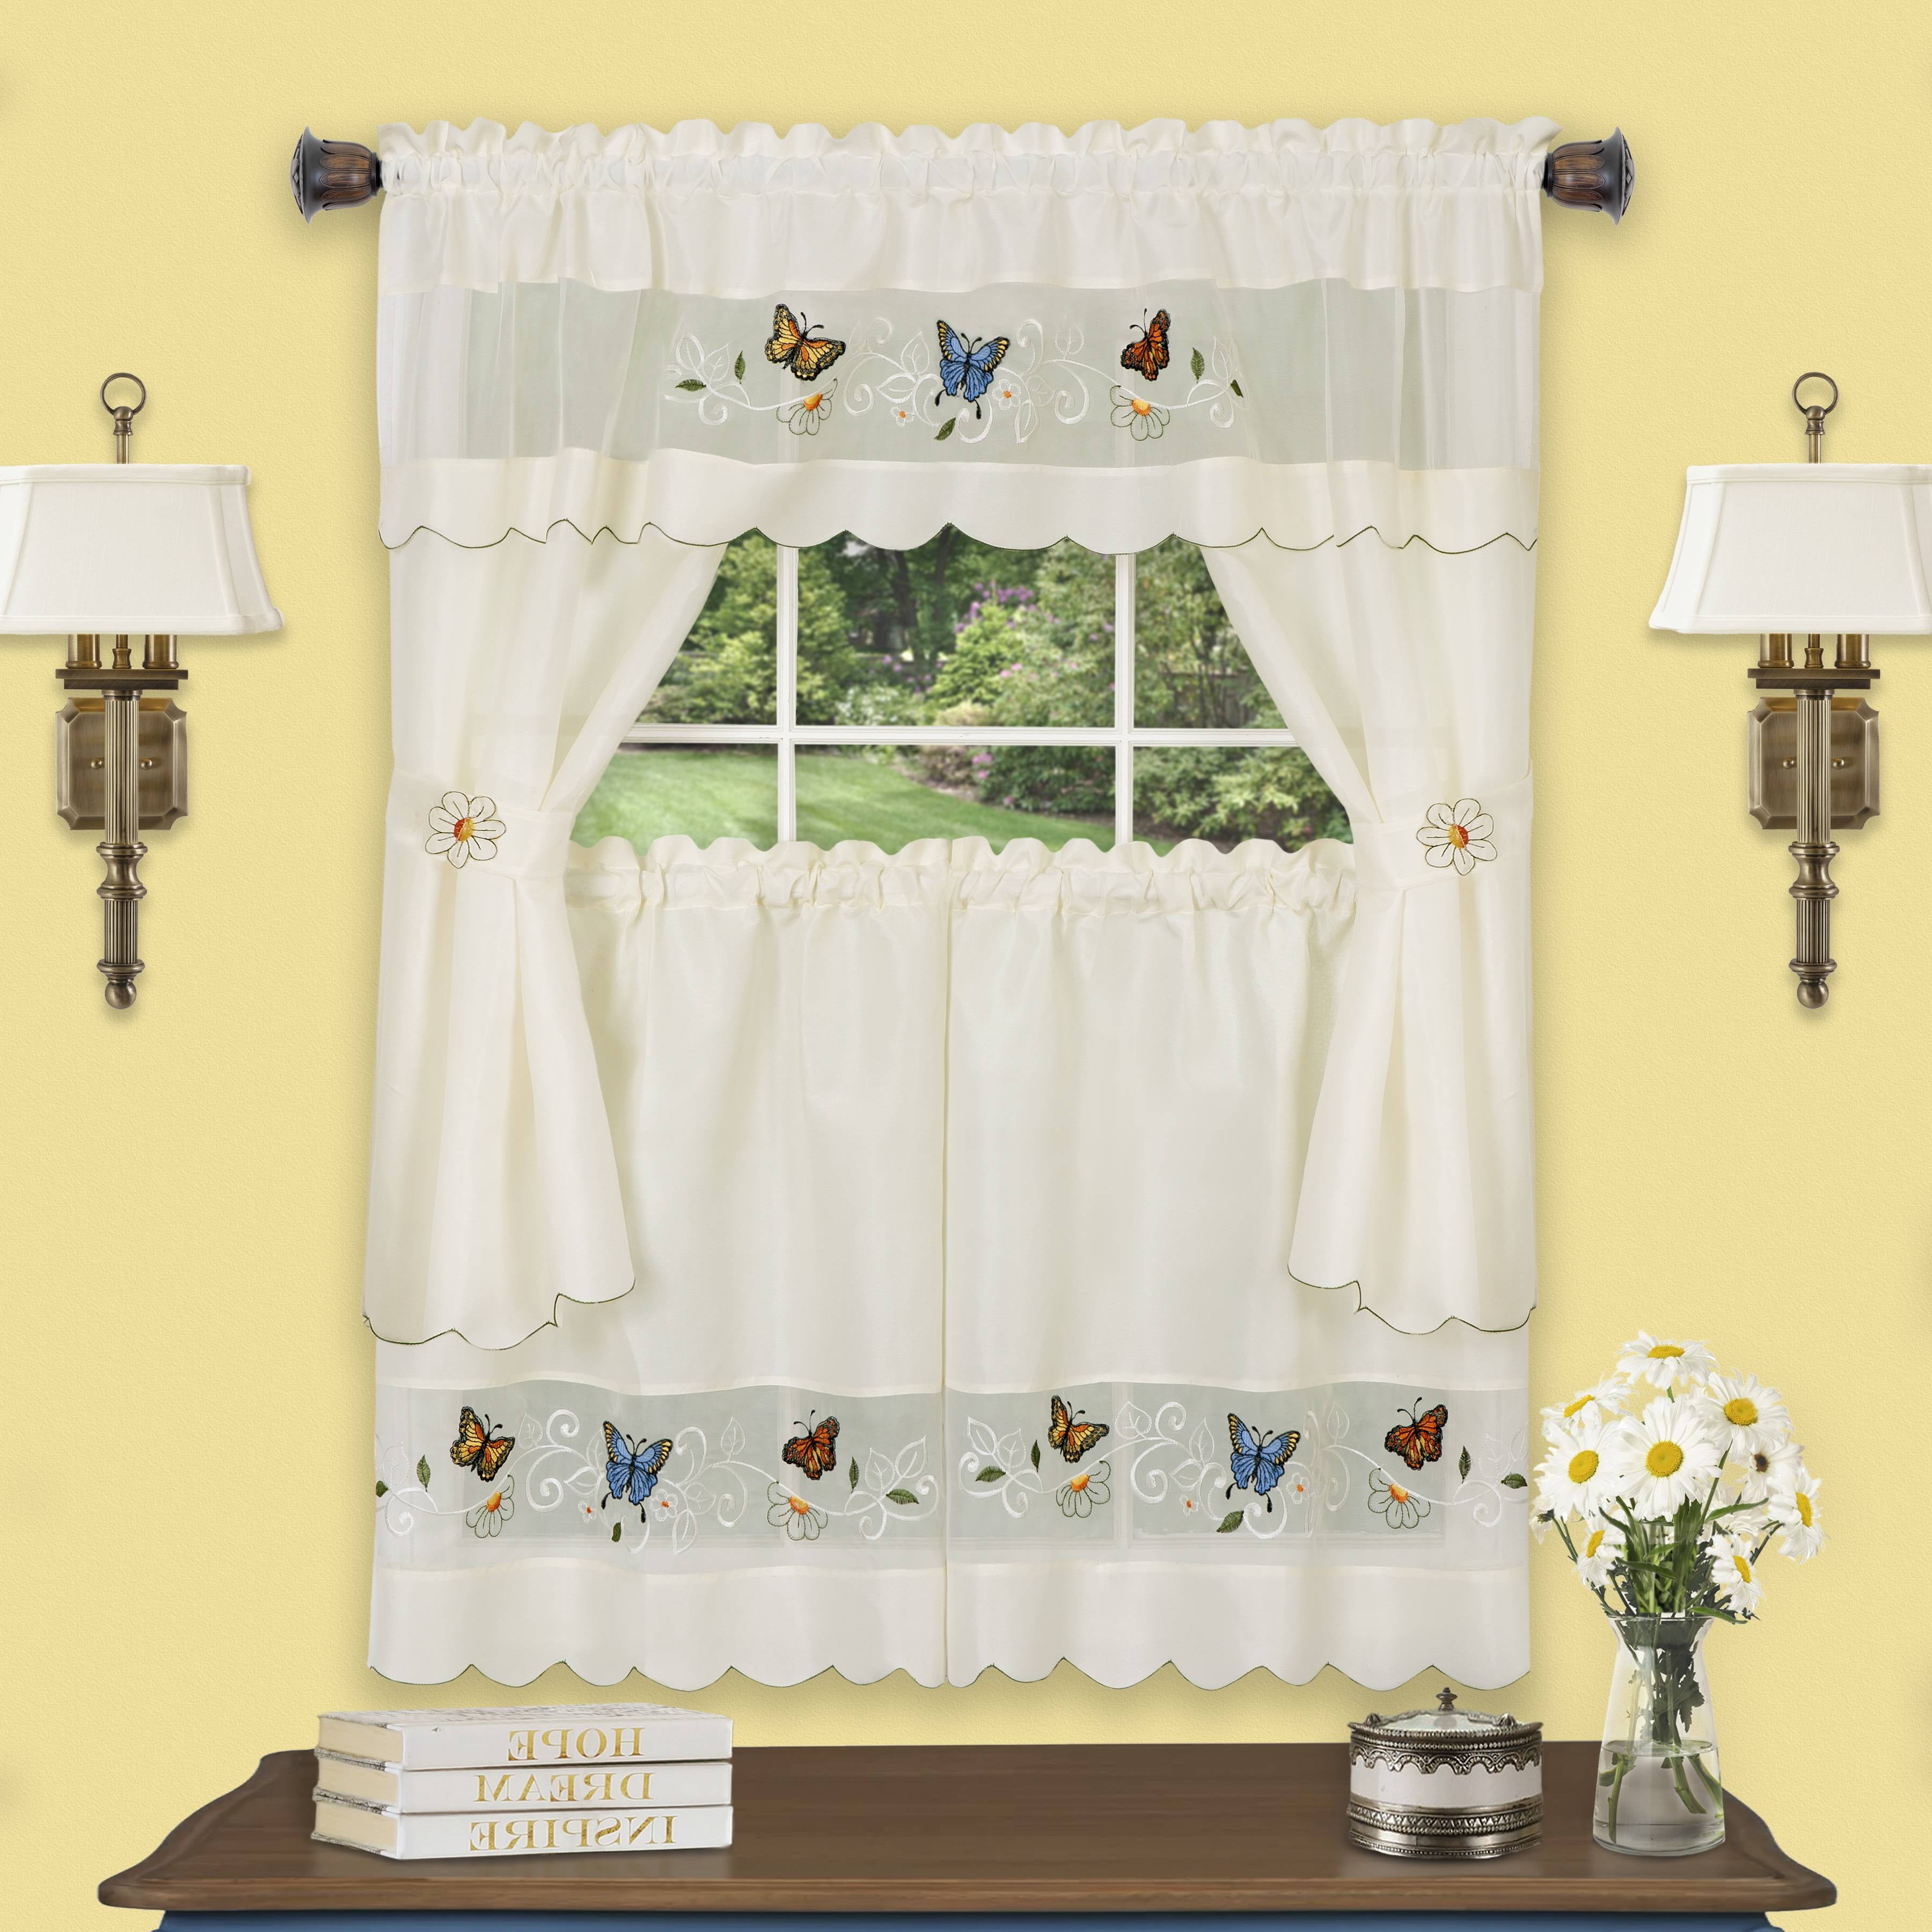 Rose Embellished Cottage Window Curtain Set Rose Achim ROCS24RS12 58 x 24 in 